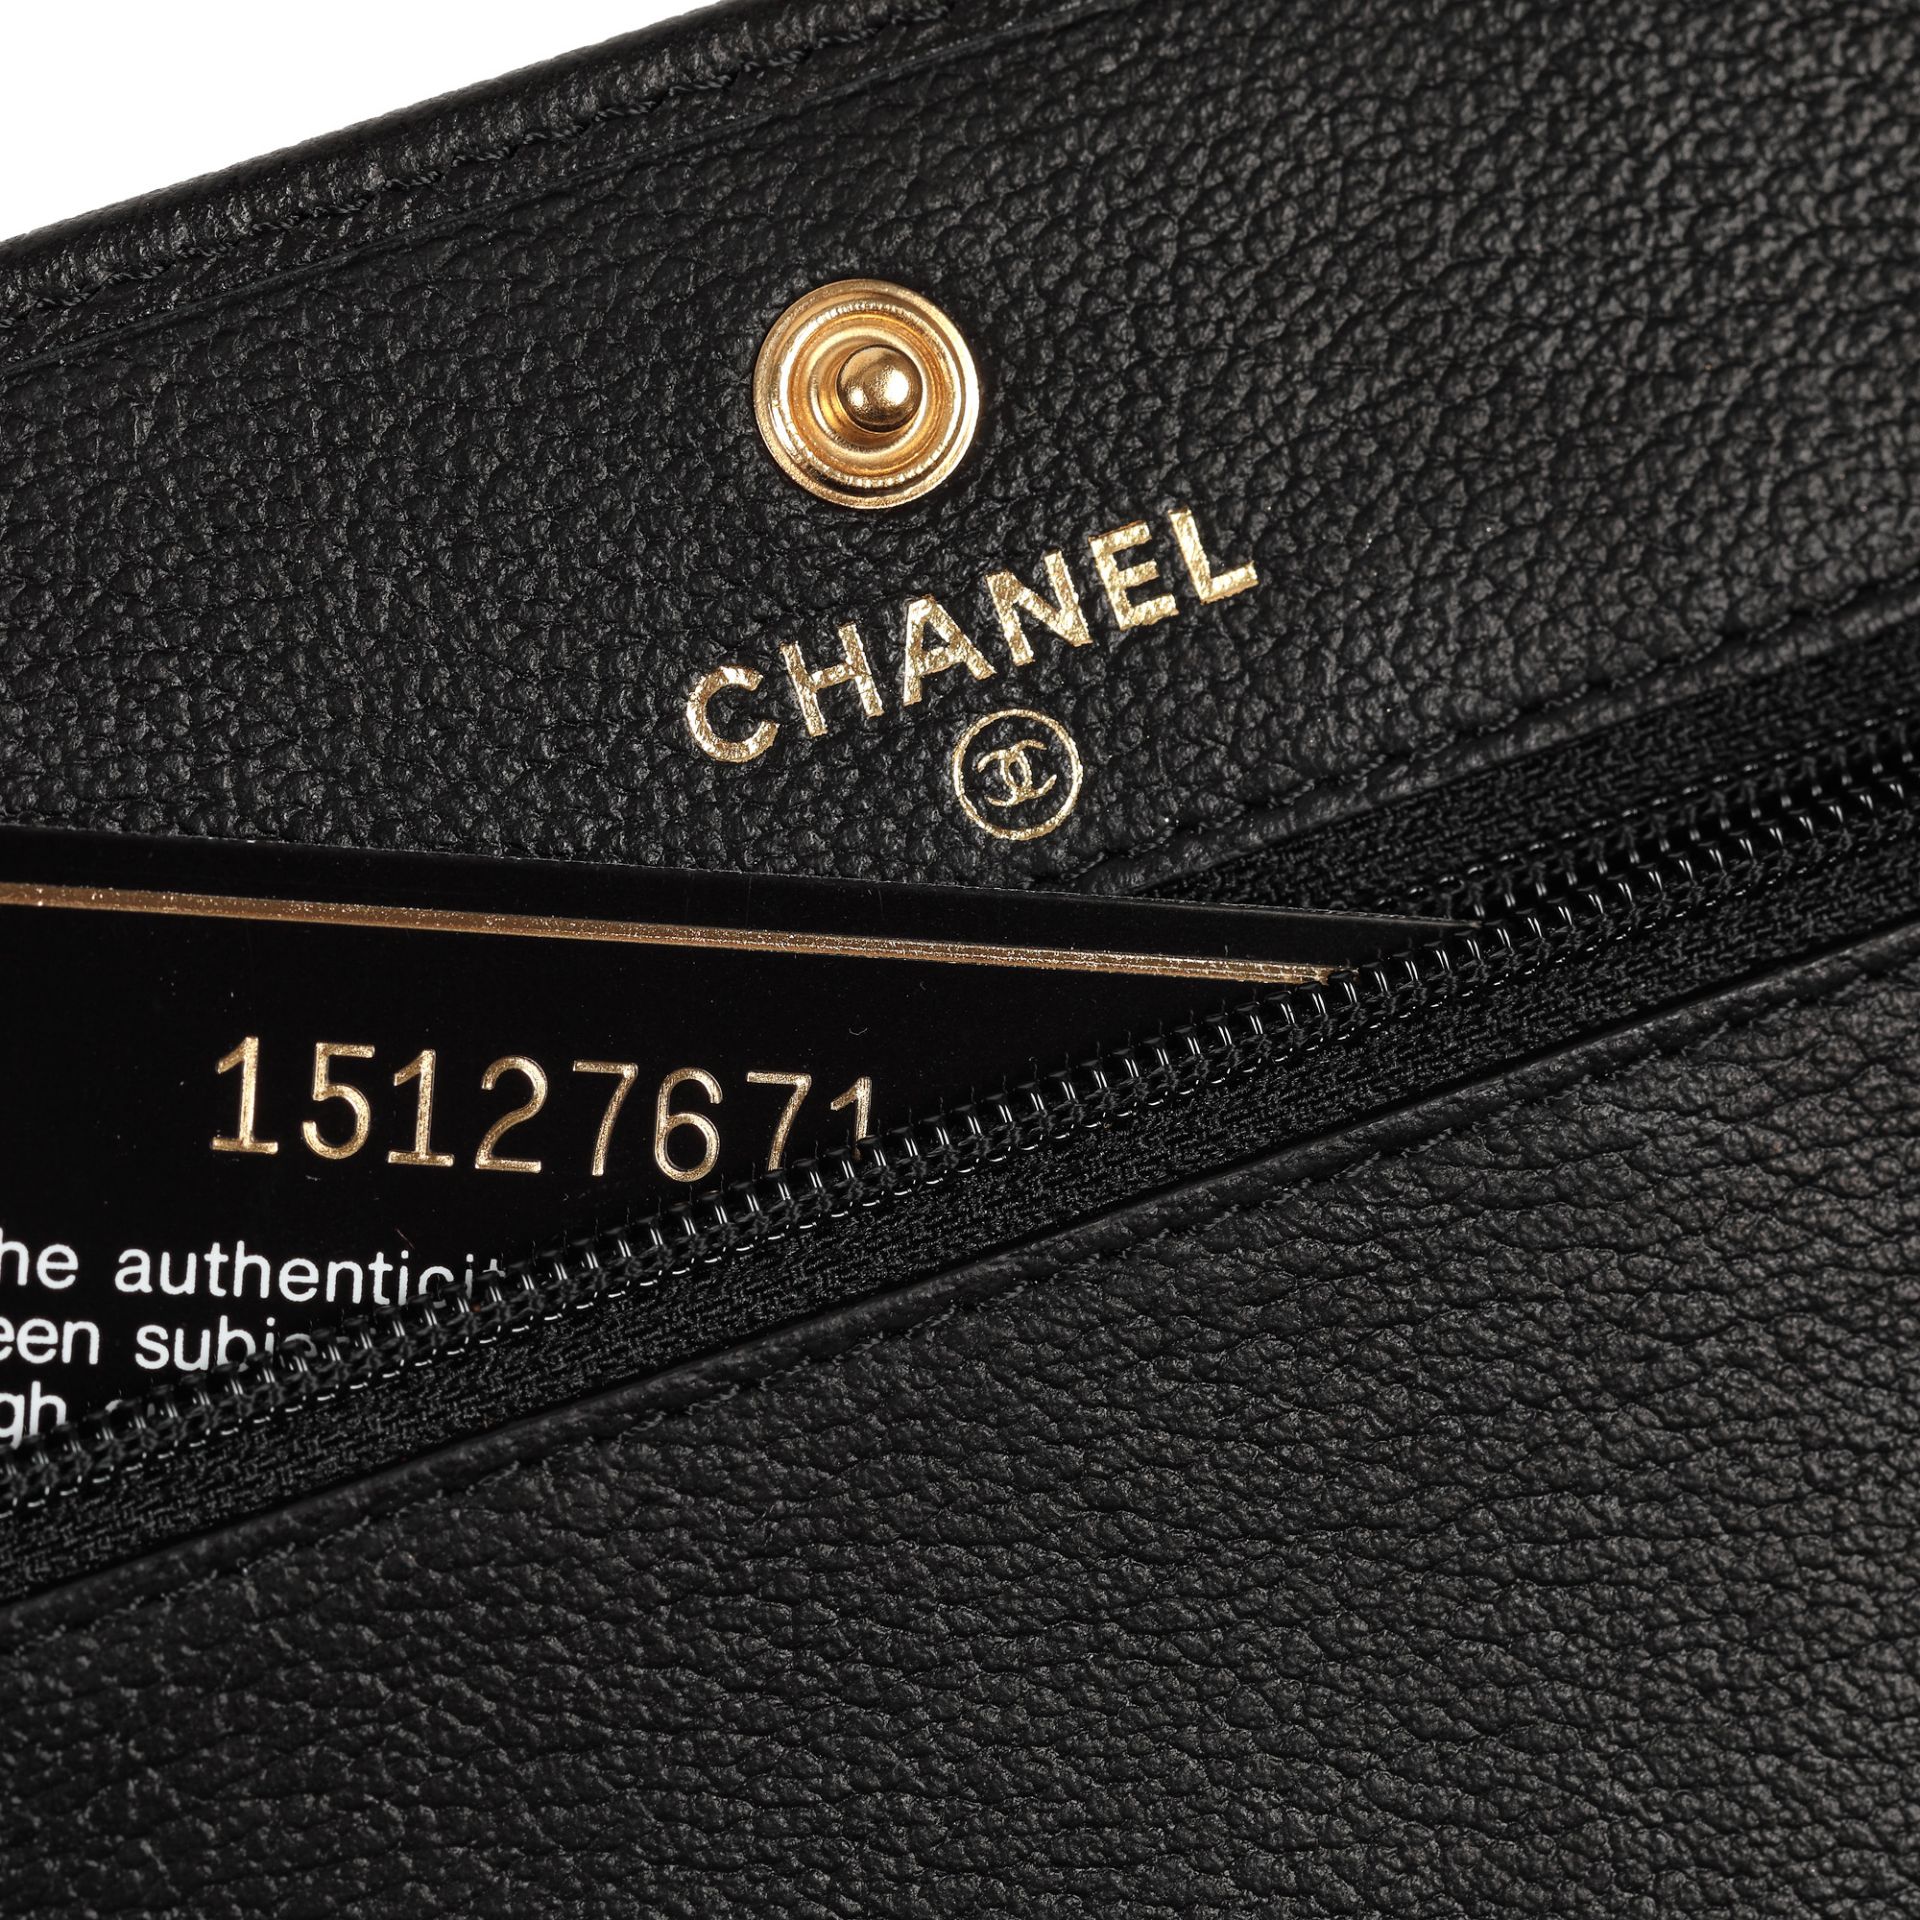 "Camellia" - Chanel bag, leather, black, authenticity card and original box - Image 3 of 3